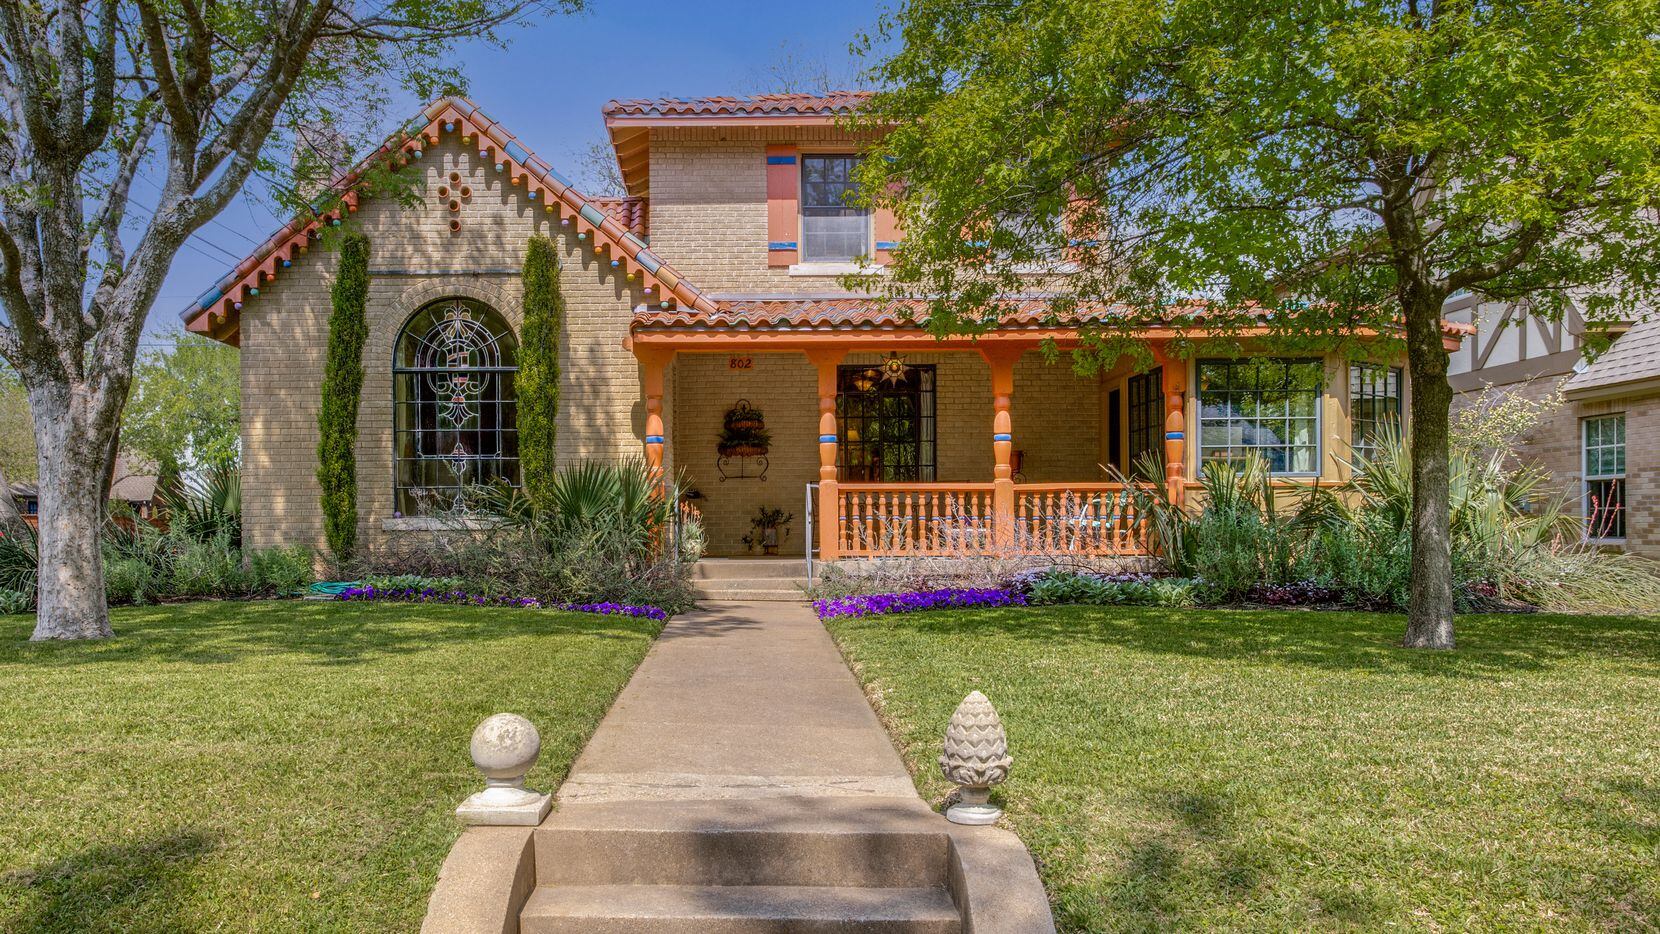 Take a look at this historic Hollywood Heights home at 802 Clermont Ave. in Dallas.